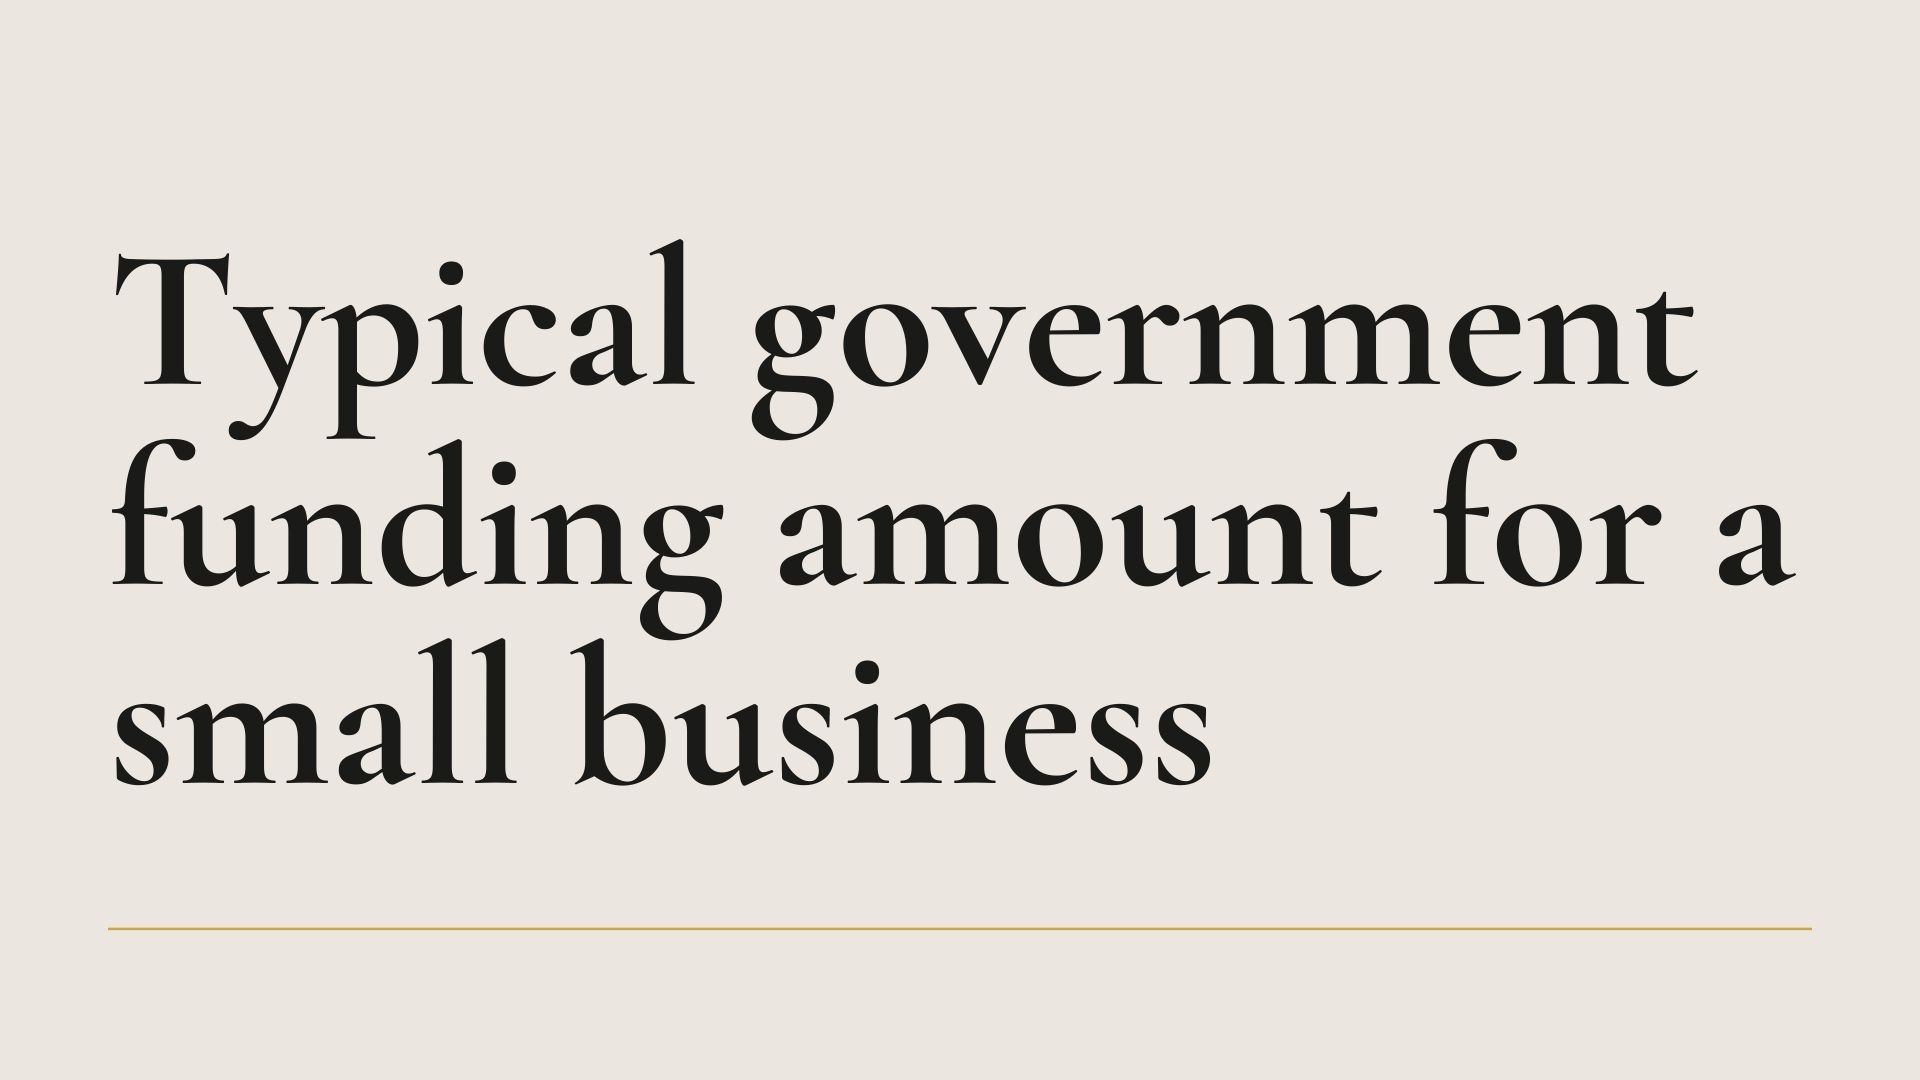 Typical government funding amounts